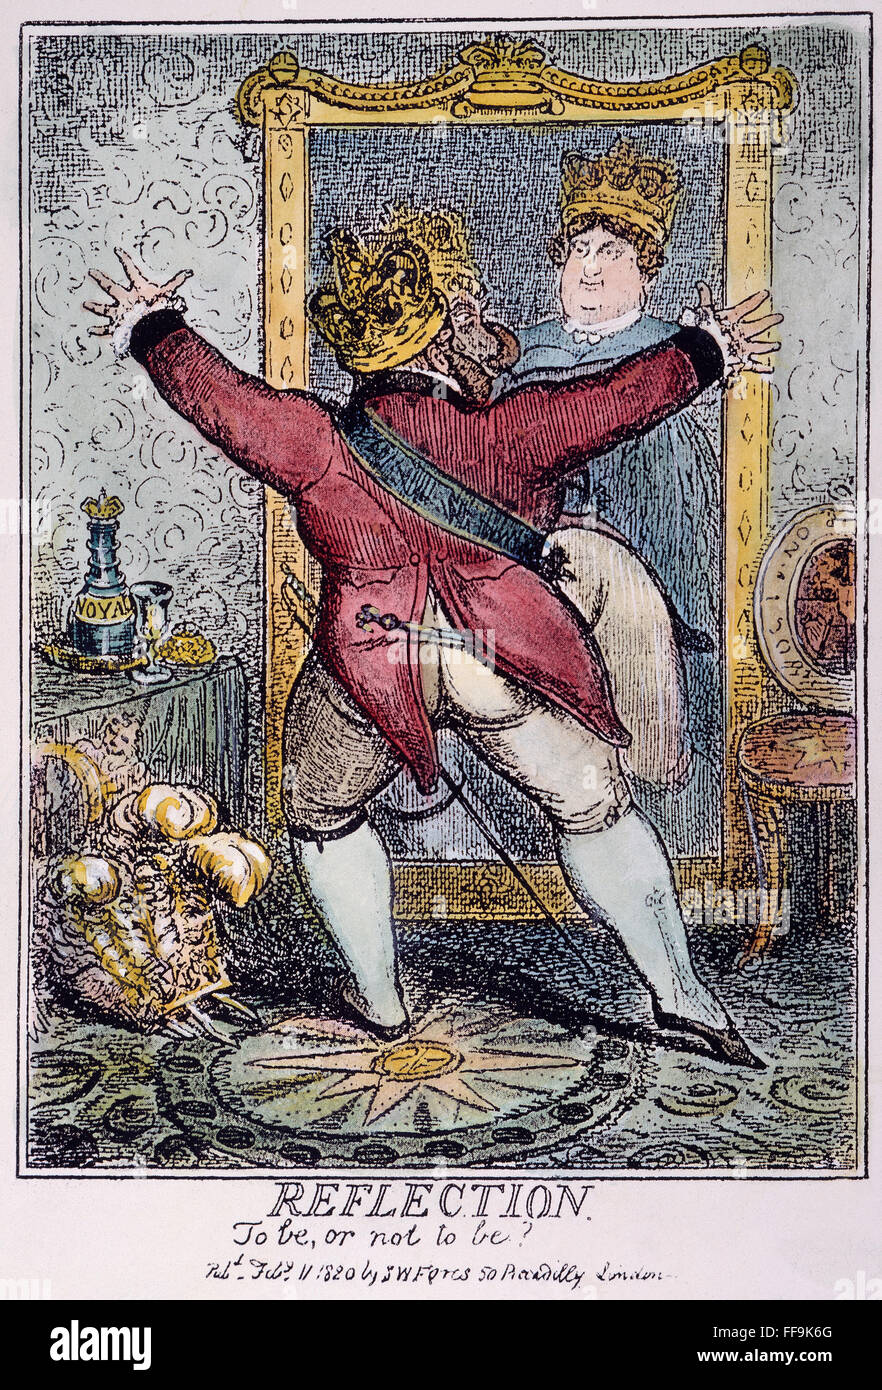 CARTOON: GEORGE IV, 1820. /nReflection (To be, or not to be?). Cartoon, 1820, by Robert Cruickshank showing King George IV of England unpleasantly surprised to find the reflection of his wife, Queen Caroline, who refused to give up the crown. Stock Photo